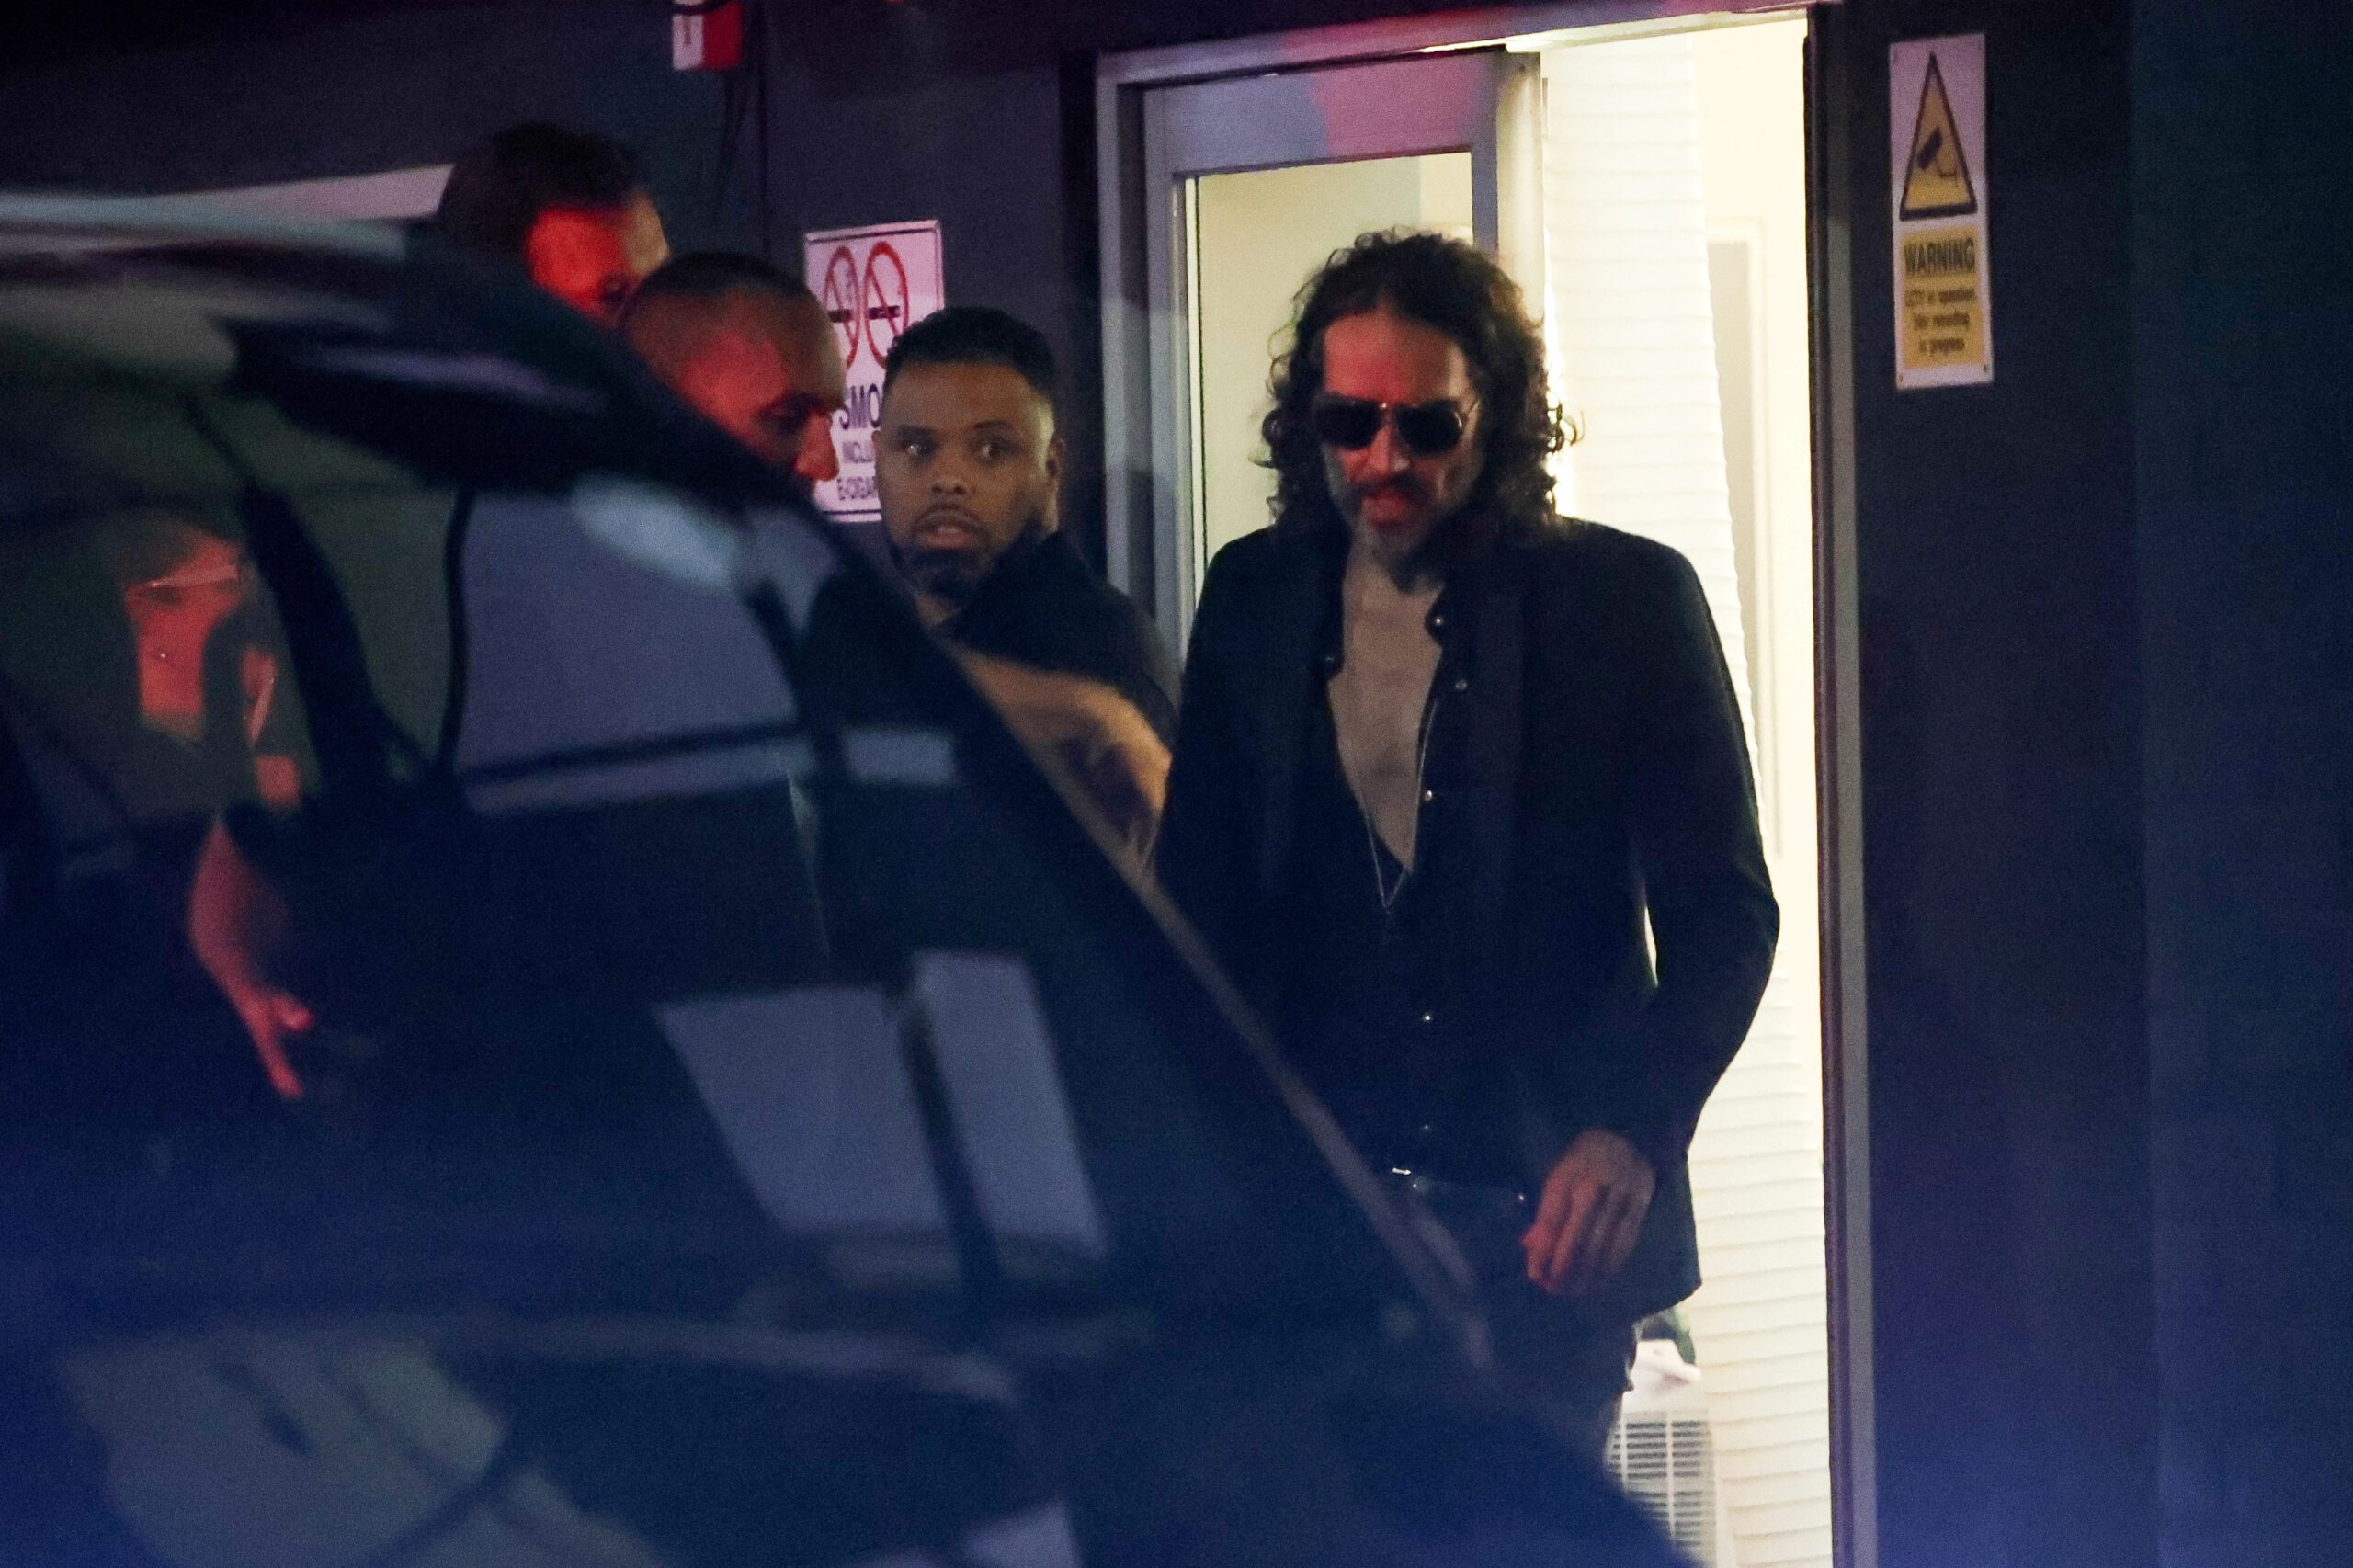 UK comedian Russell Brand denies media allegations of sex assaults picture image